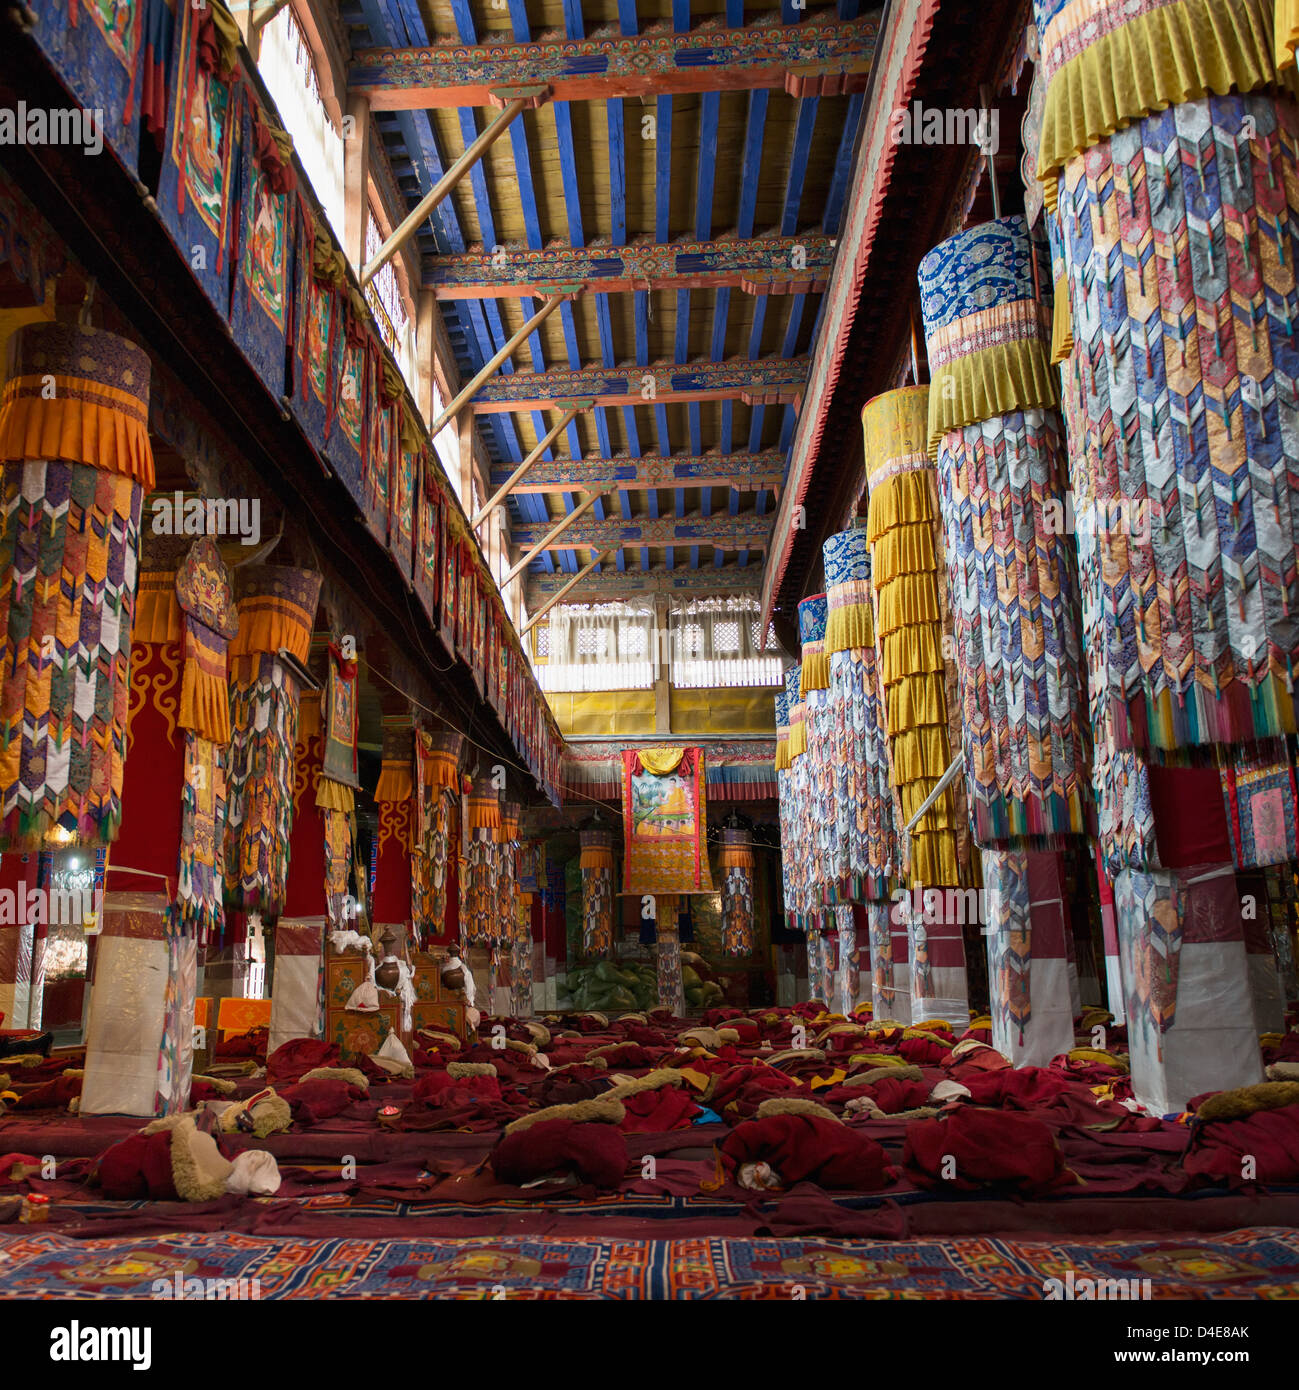 Drepung Monastery, Monk's clothing and monastery interior; Lhasa Stock